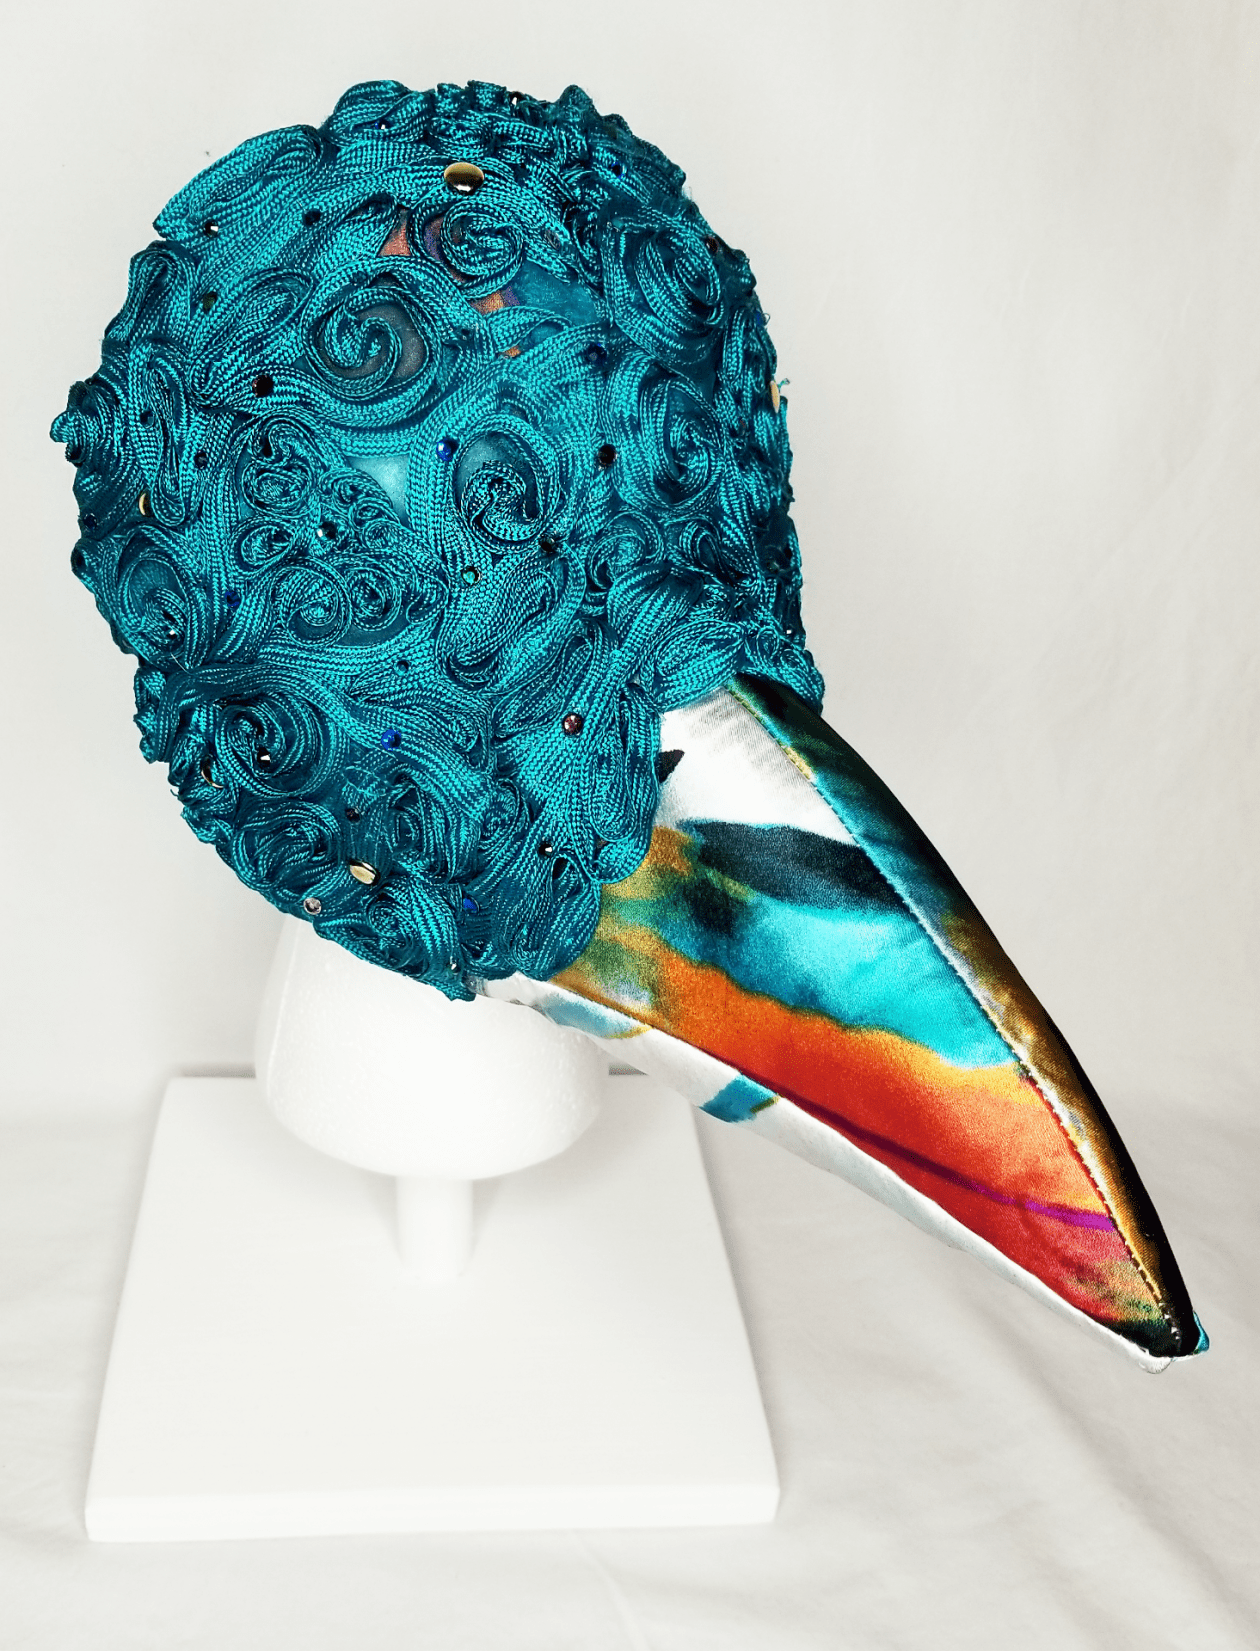 A beaked mask with teal detail